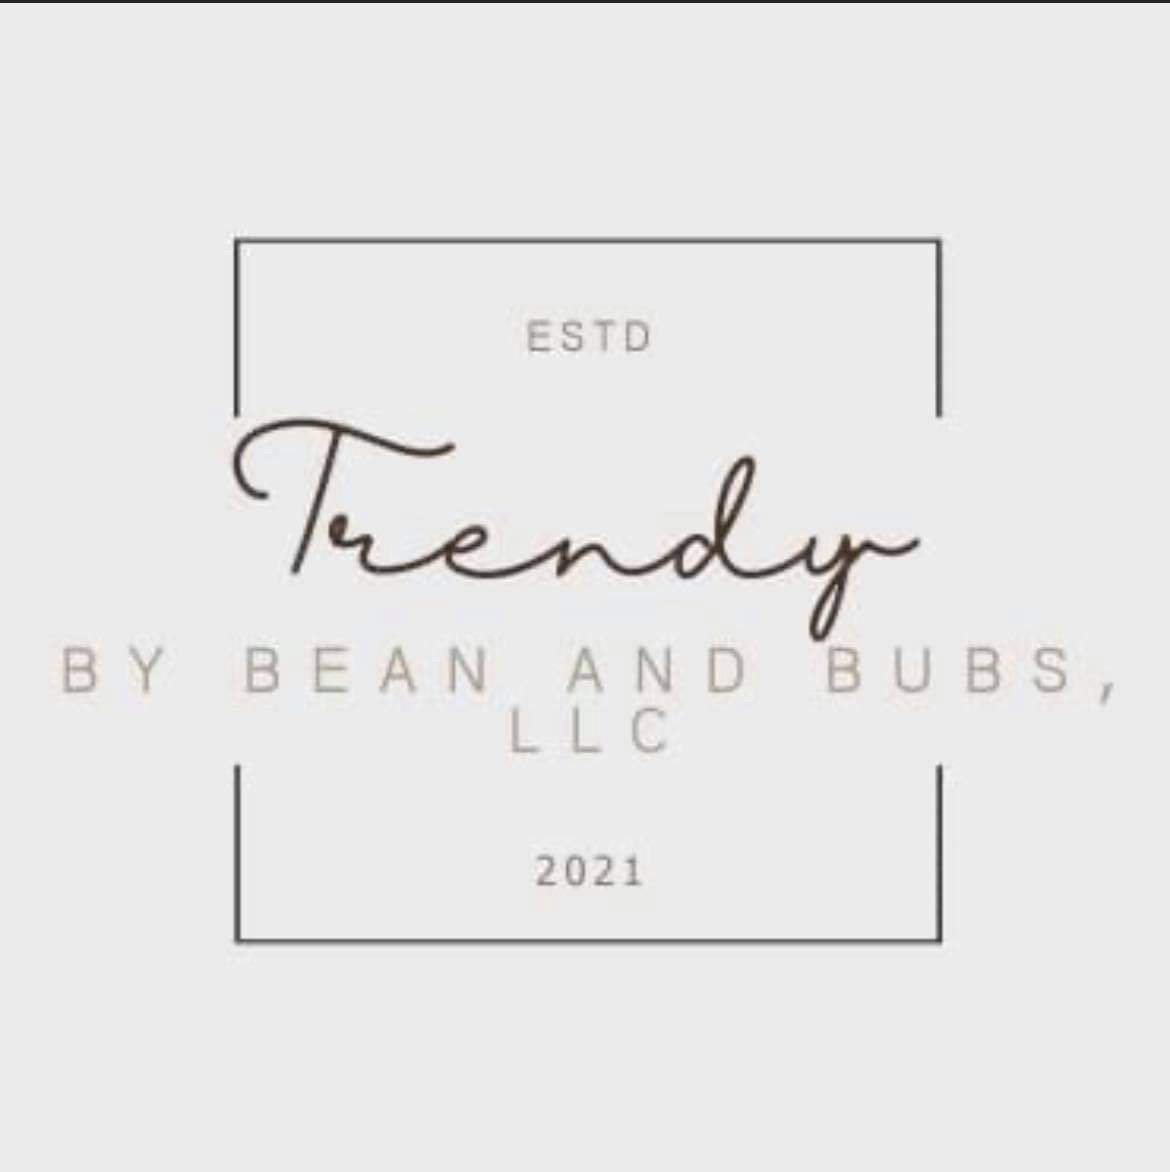 Trendy, By Bean and Bubs LLC